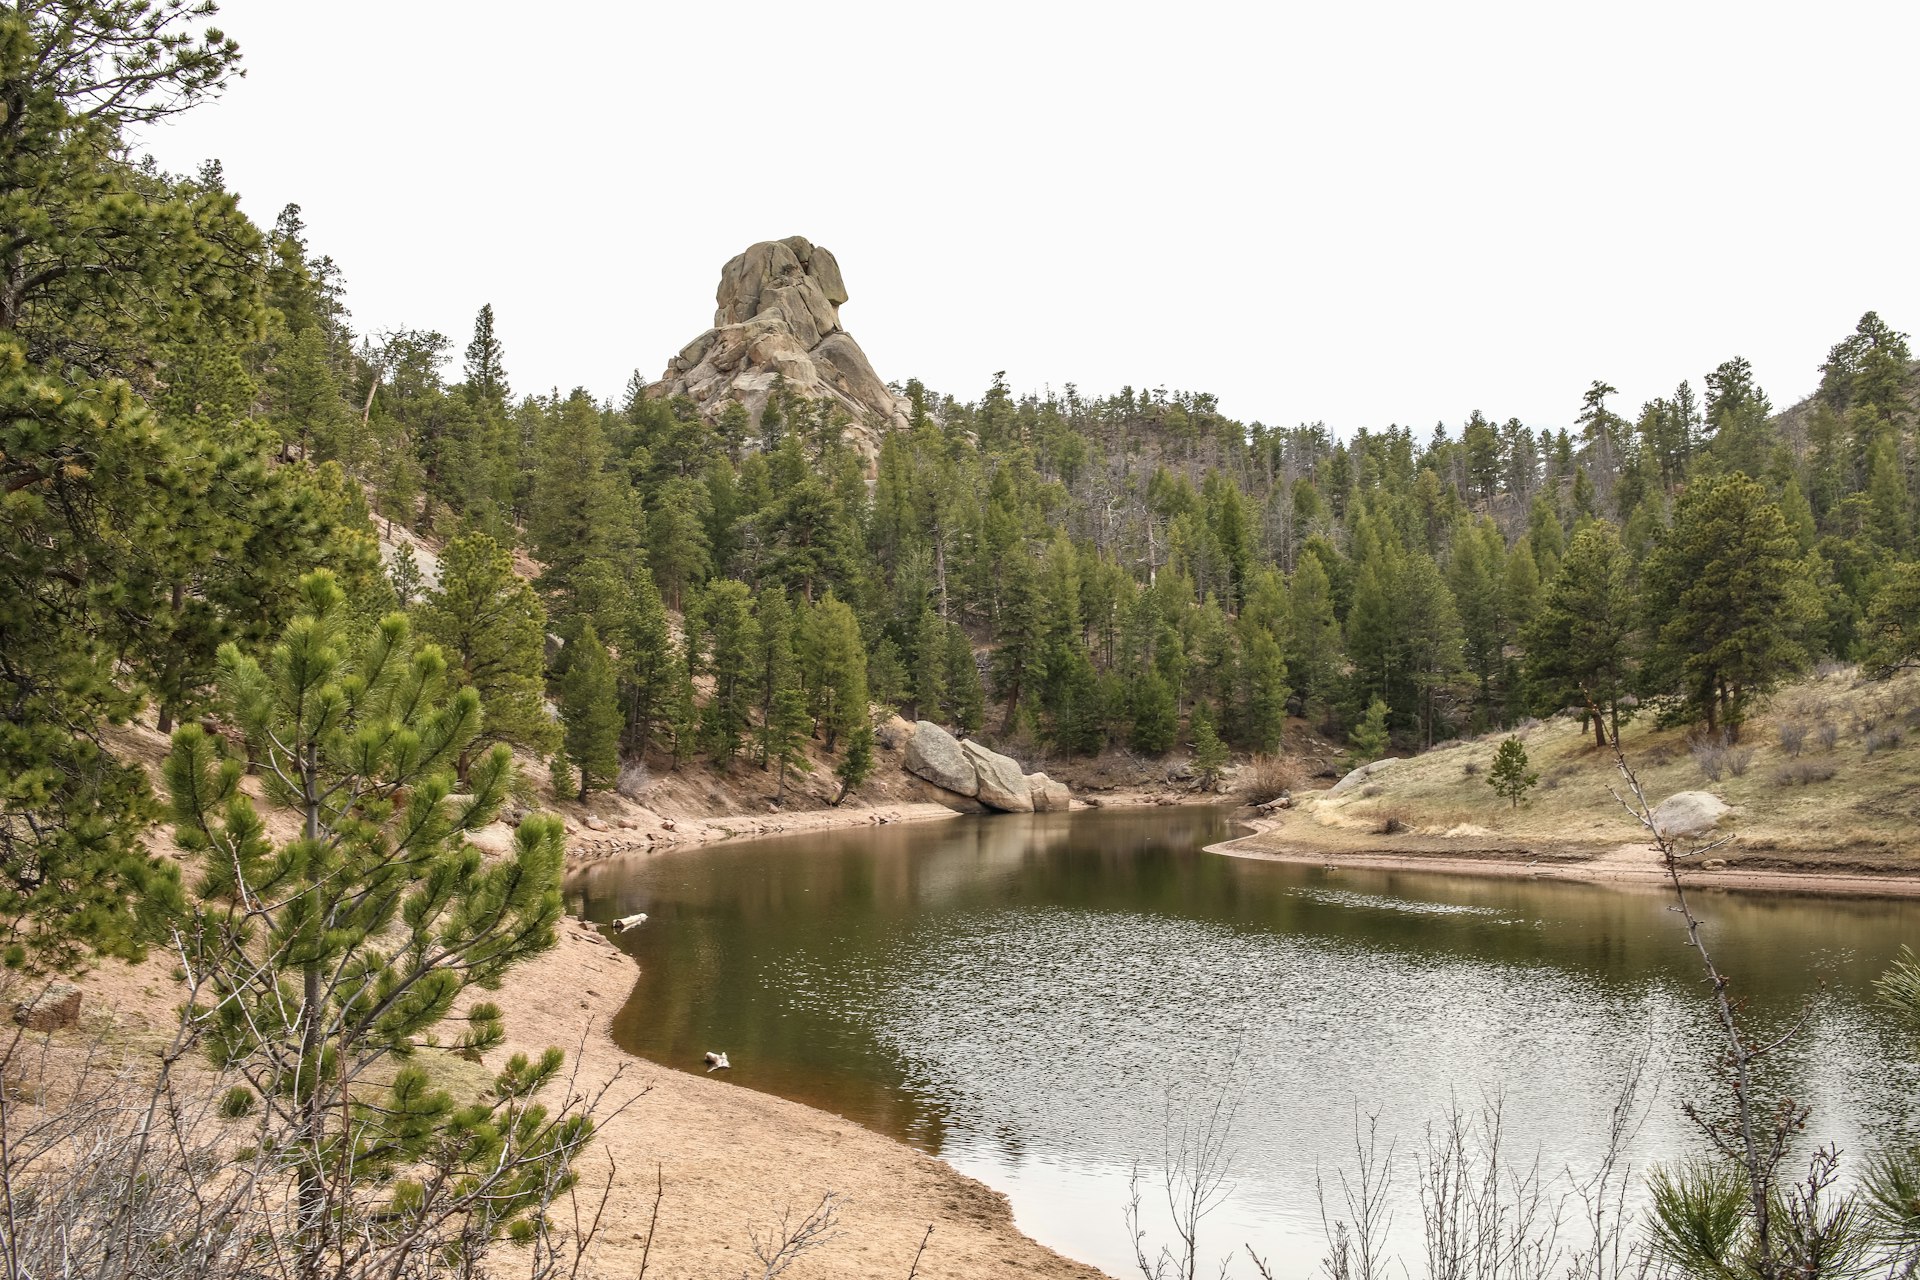 One of the reservoirs in Curt Gowdy State Park with mountains in the background